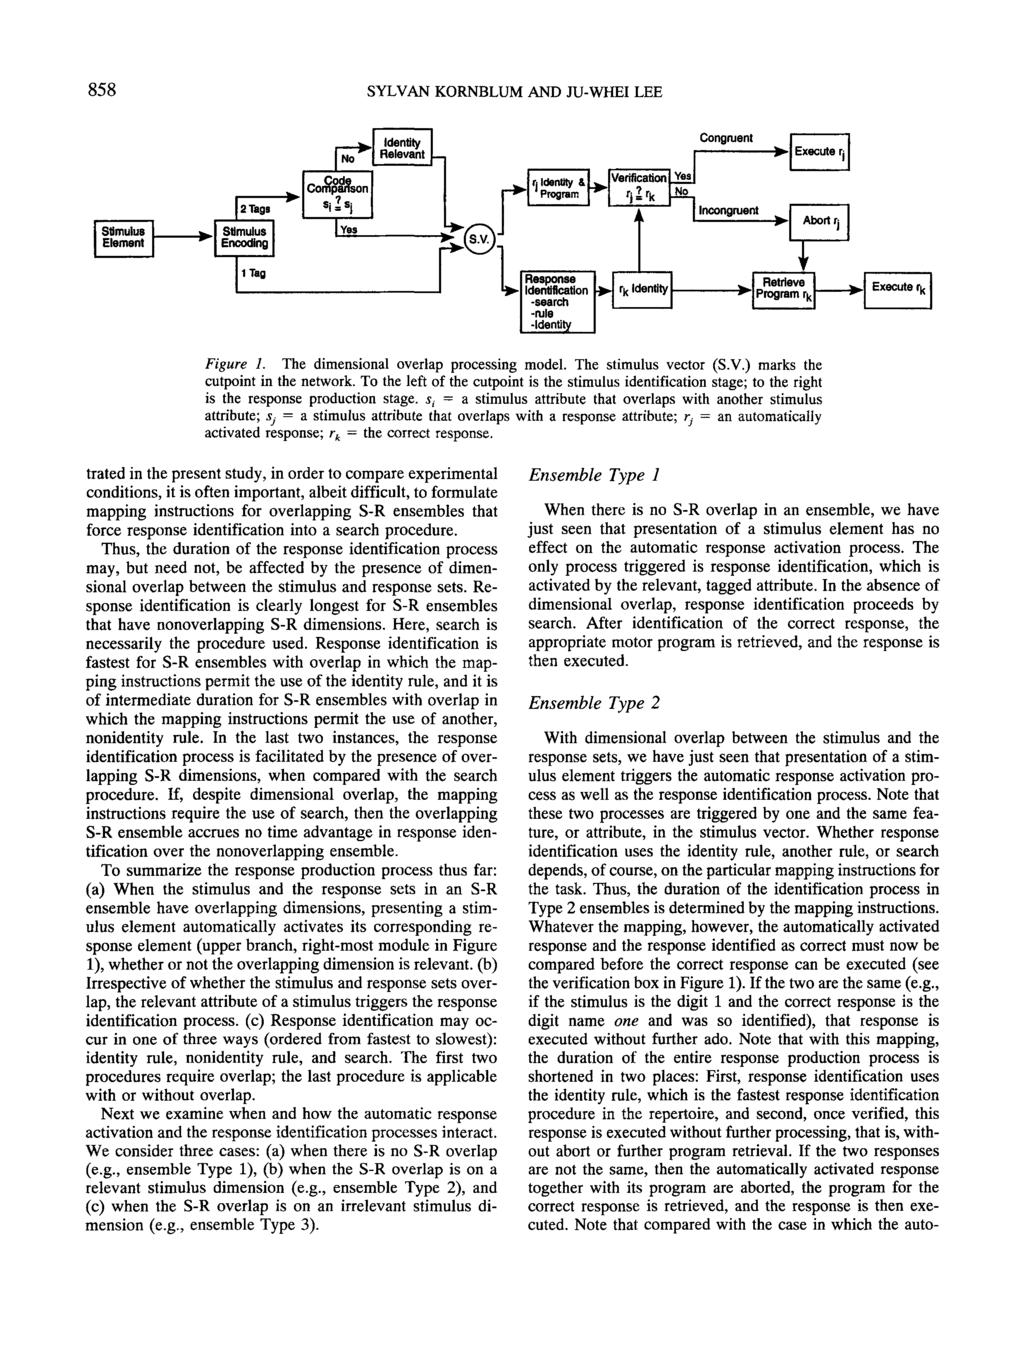 858 SYLVAN KORNBLUM AND JU-WHEI LEE Figure 1. The dimensional overlap processing model. The stimulus vector (S.V.) marks the cutpoint in the network.